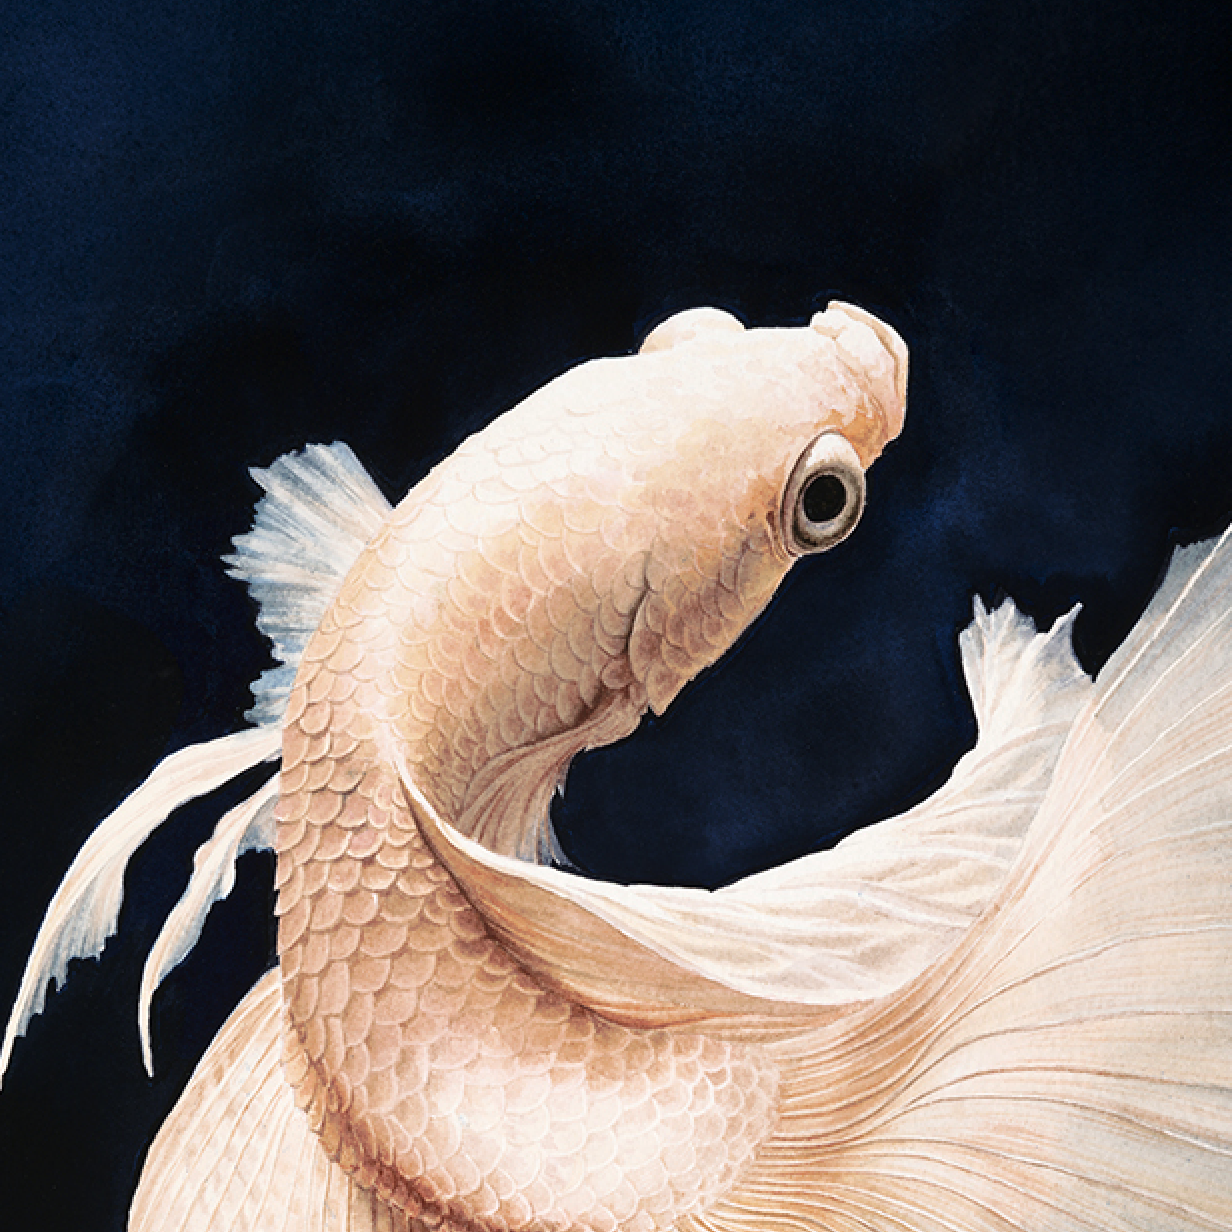 robgarringer: blue and white betta fish in a comic book style